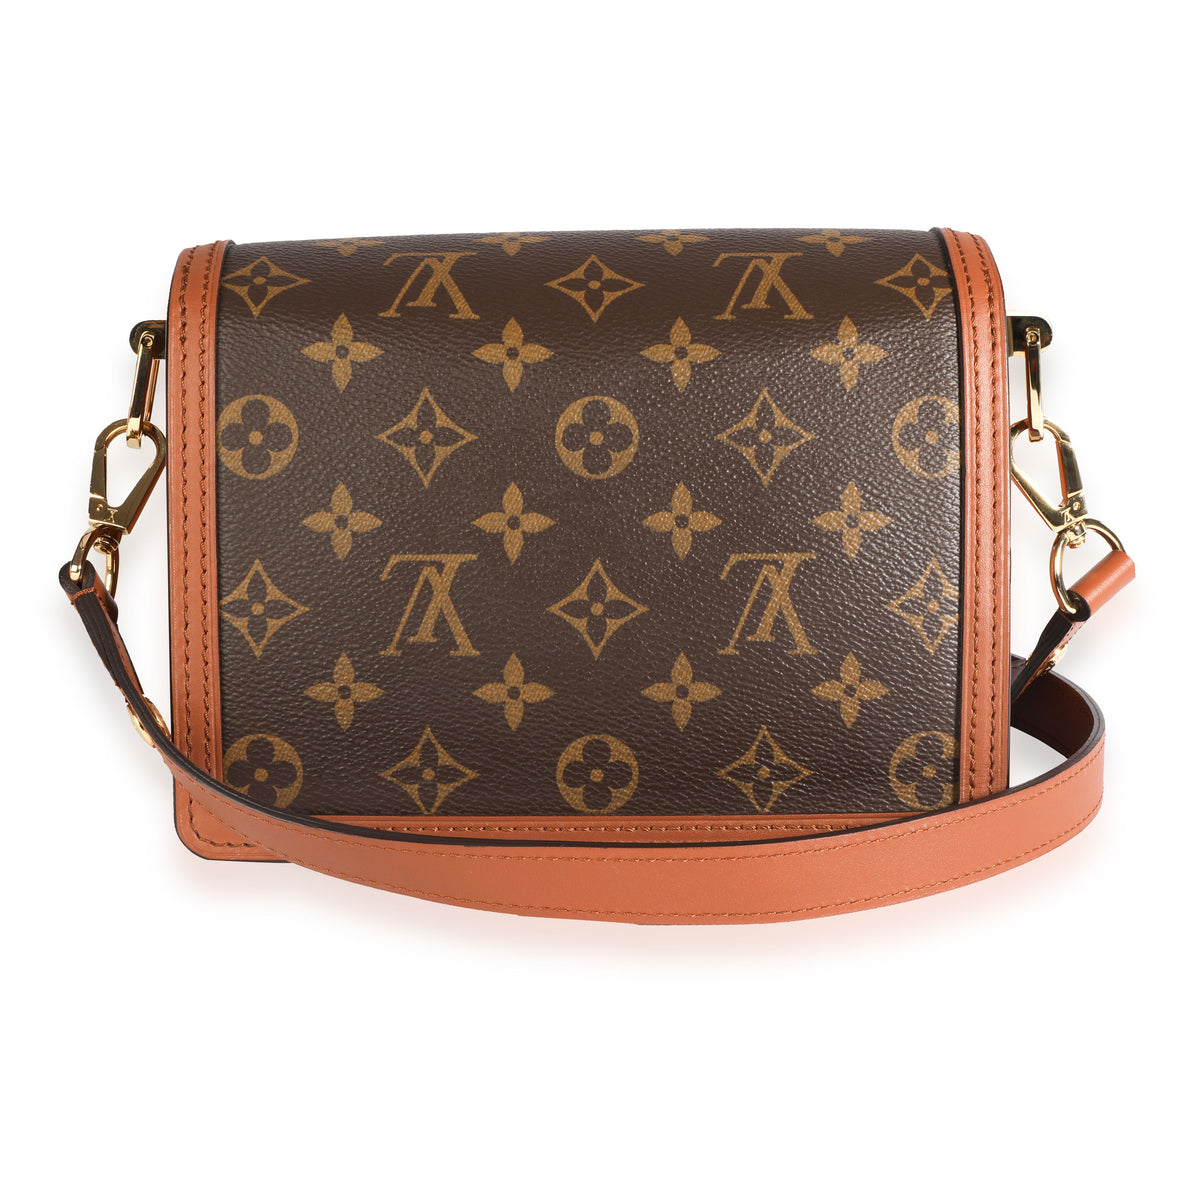 Today's Luxury Fashion Top Pic - Louis Vuitton Dauphine Mini Bag WhatsApp  +91 999 888 1390 for more info!